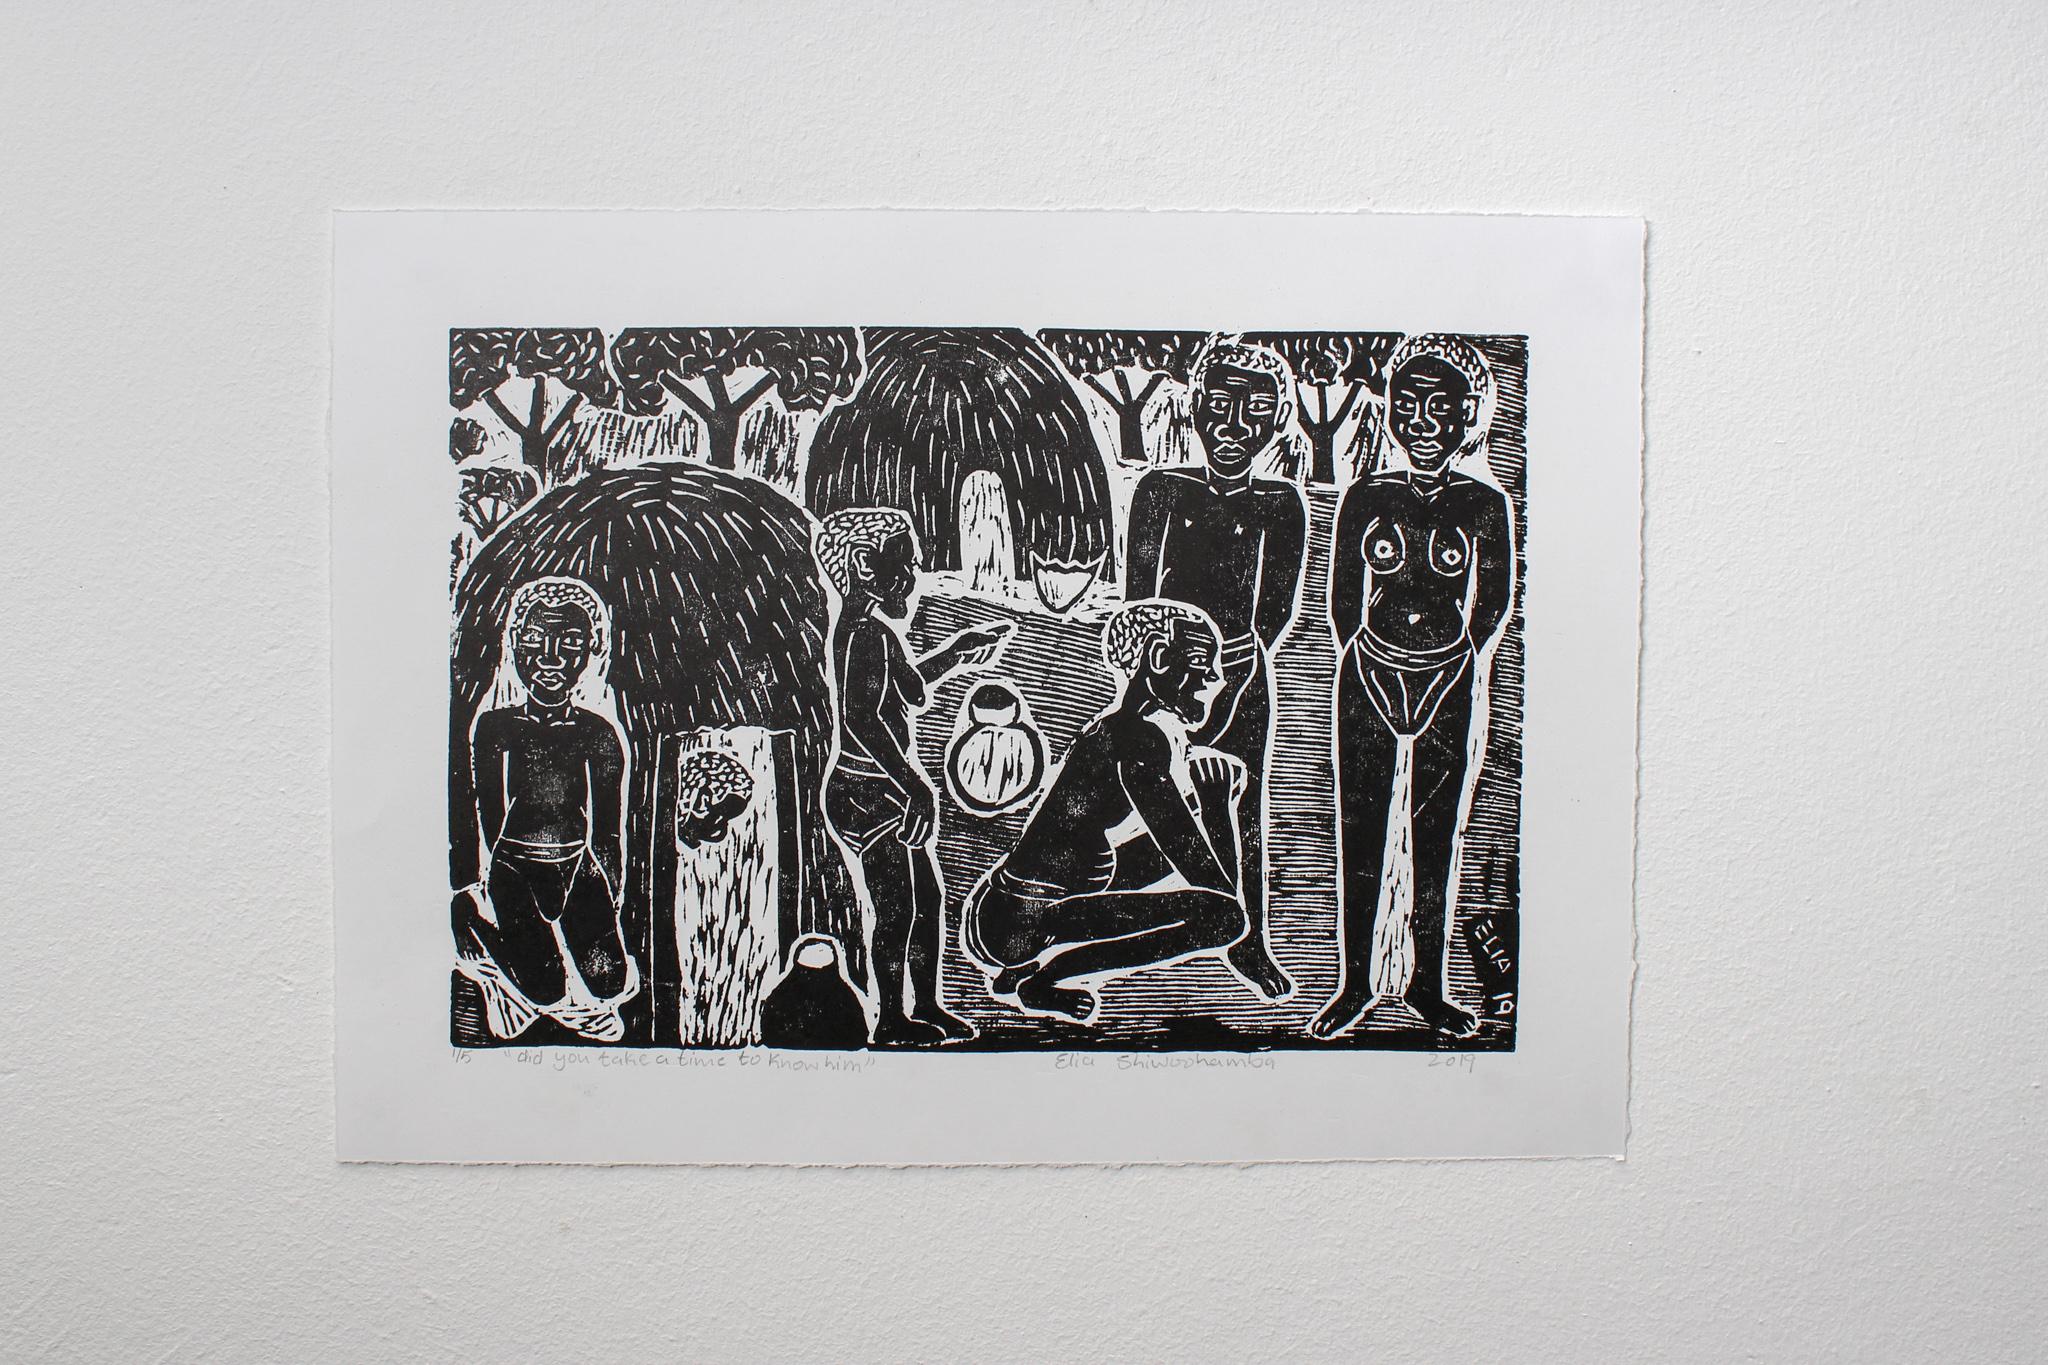 Did you take a time to know him, 2019. Linoleum block print on paper. Edition of 5

Elia Shiwoohamba was born in 1981 in Windhoek, Namibia. He graduated from the John Muafangejo Art Centre in Windhoek in 2006. Specialising in printmaking and